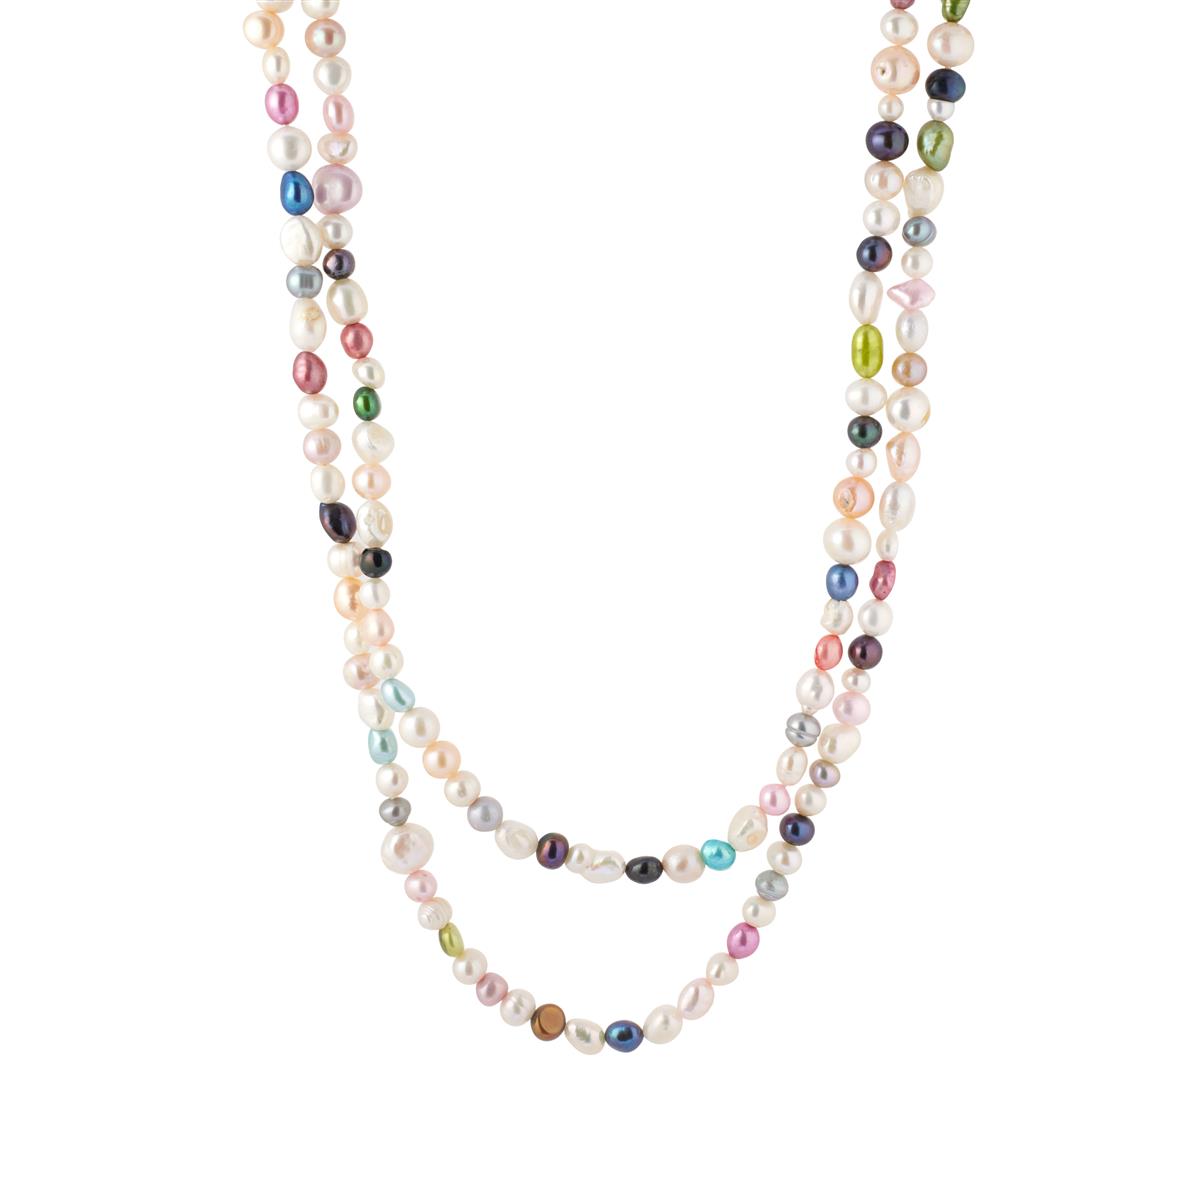 Freshwater Cultured Pearl Endless Necklace | Gemporia